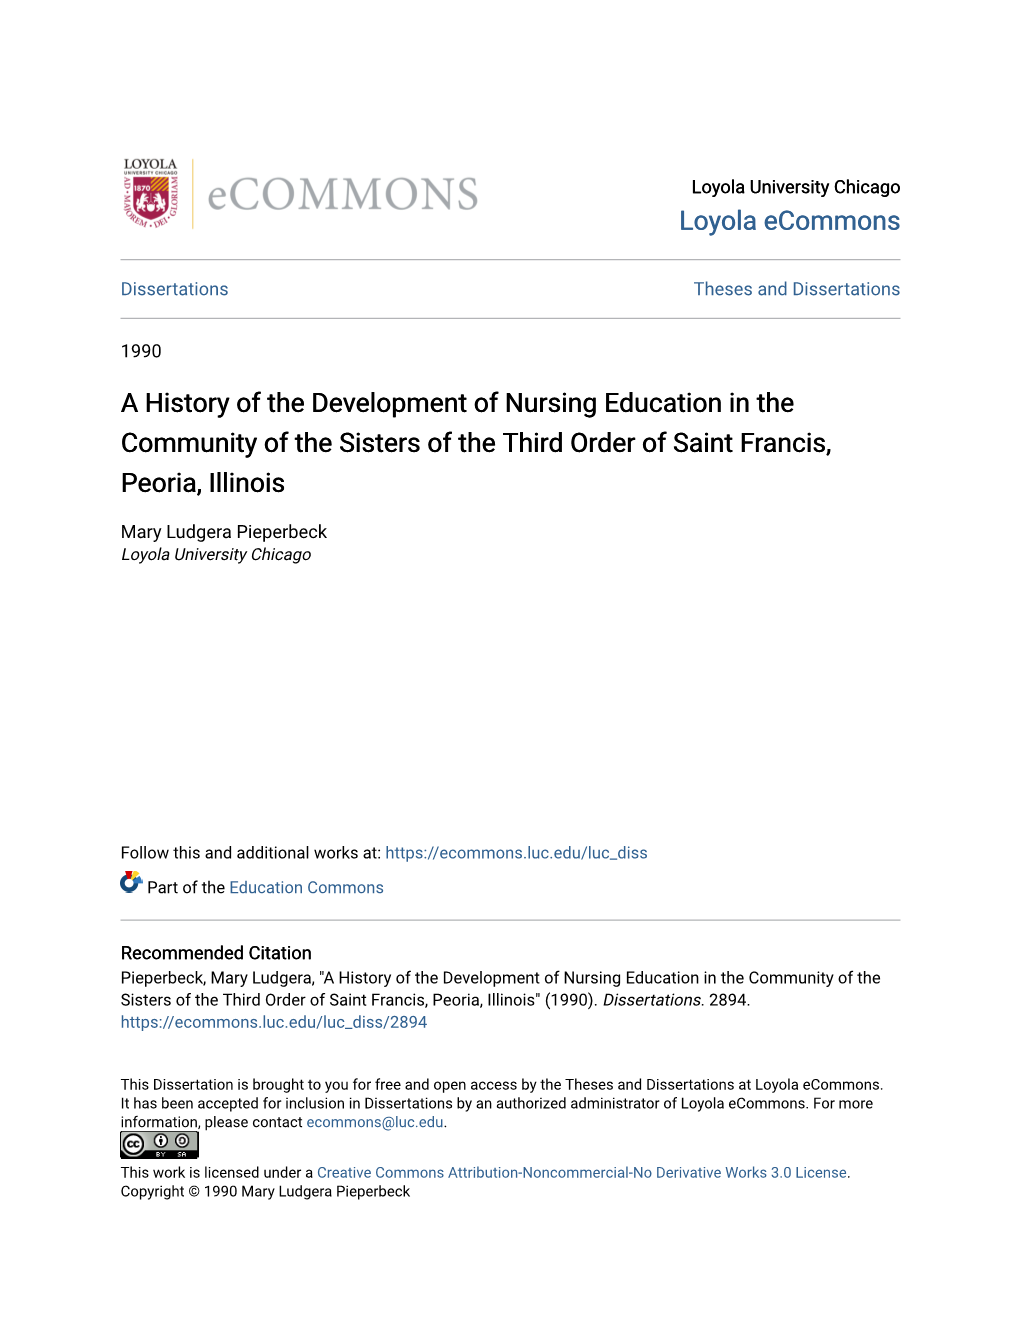 A History of the Development of Nursing Education in the Community of the Sisters of the Third Order of Saint Francis, Peoria, Illinois